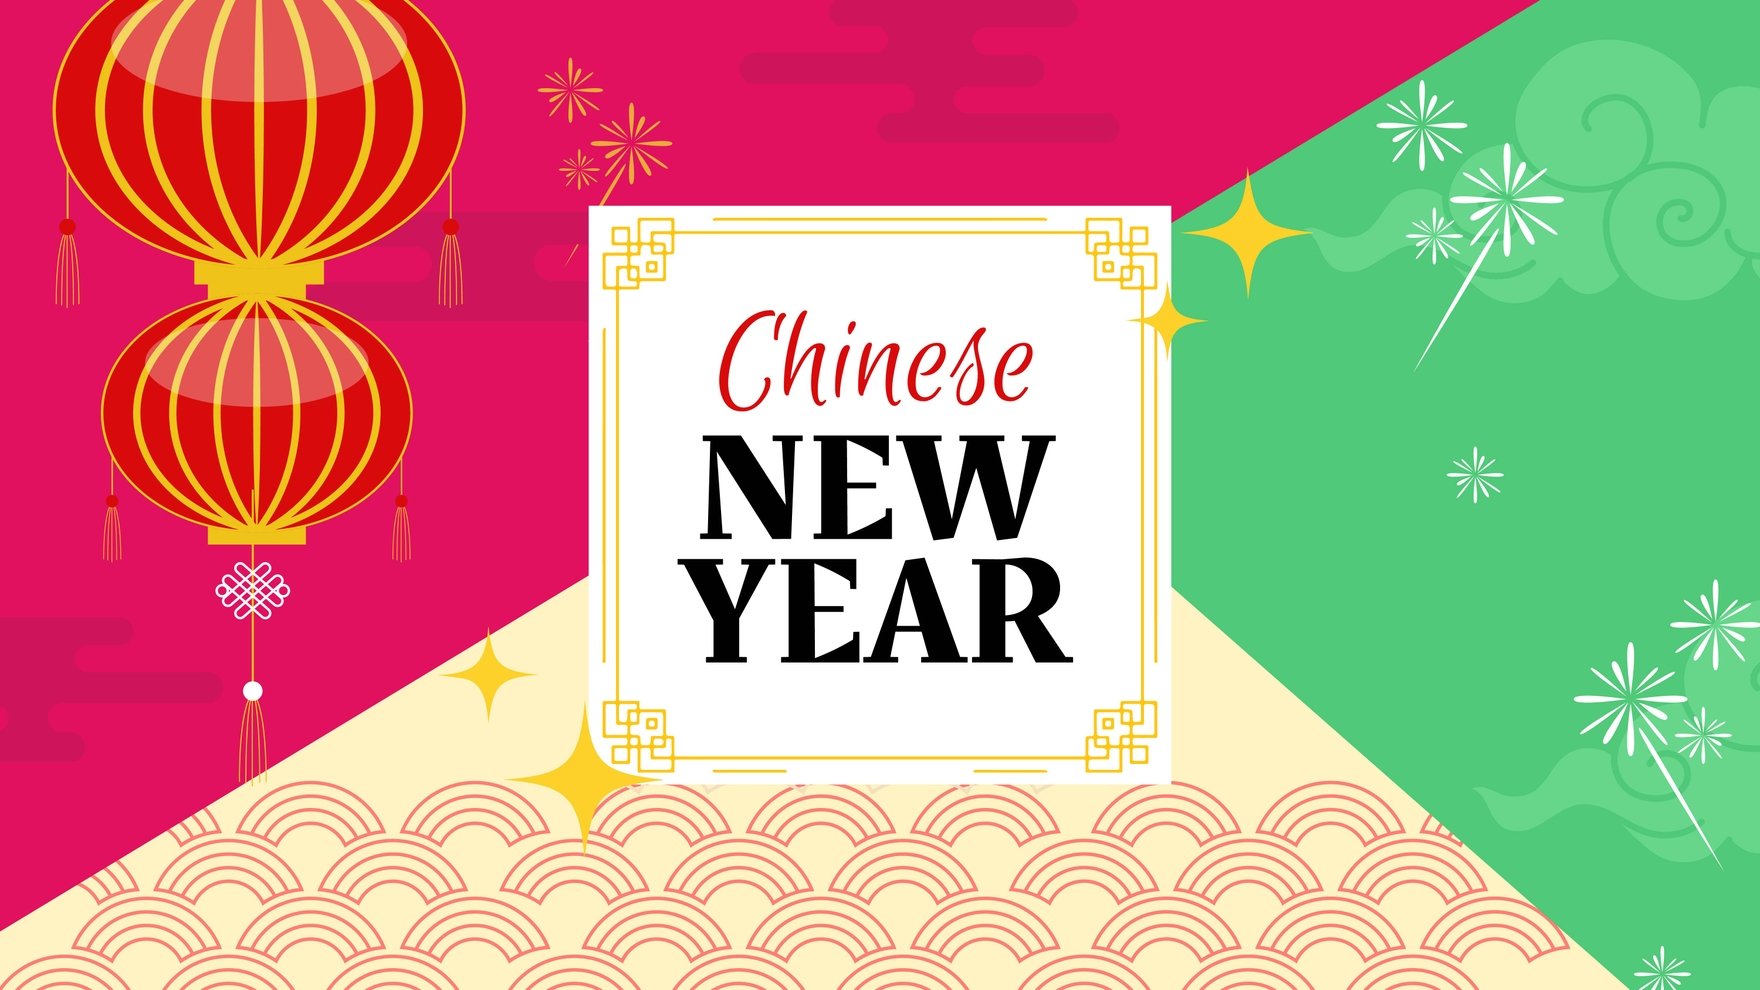 Free Chinese New Year Colorful Background in PDF, Illustrator, PSD, EPS, SVG, JPG, PNG